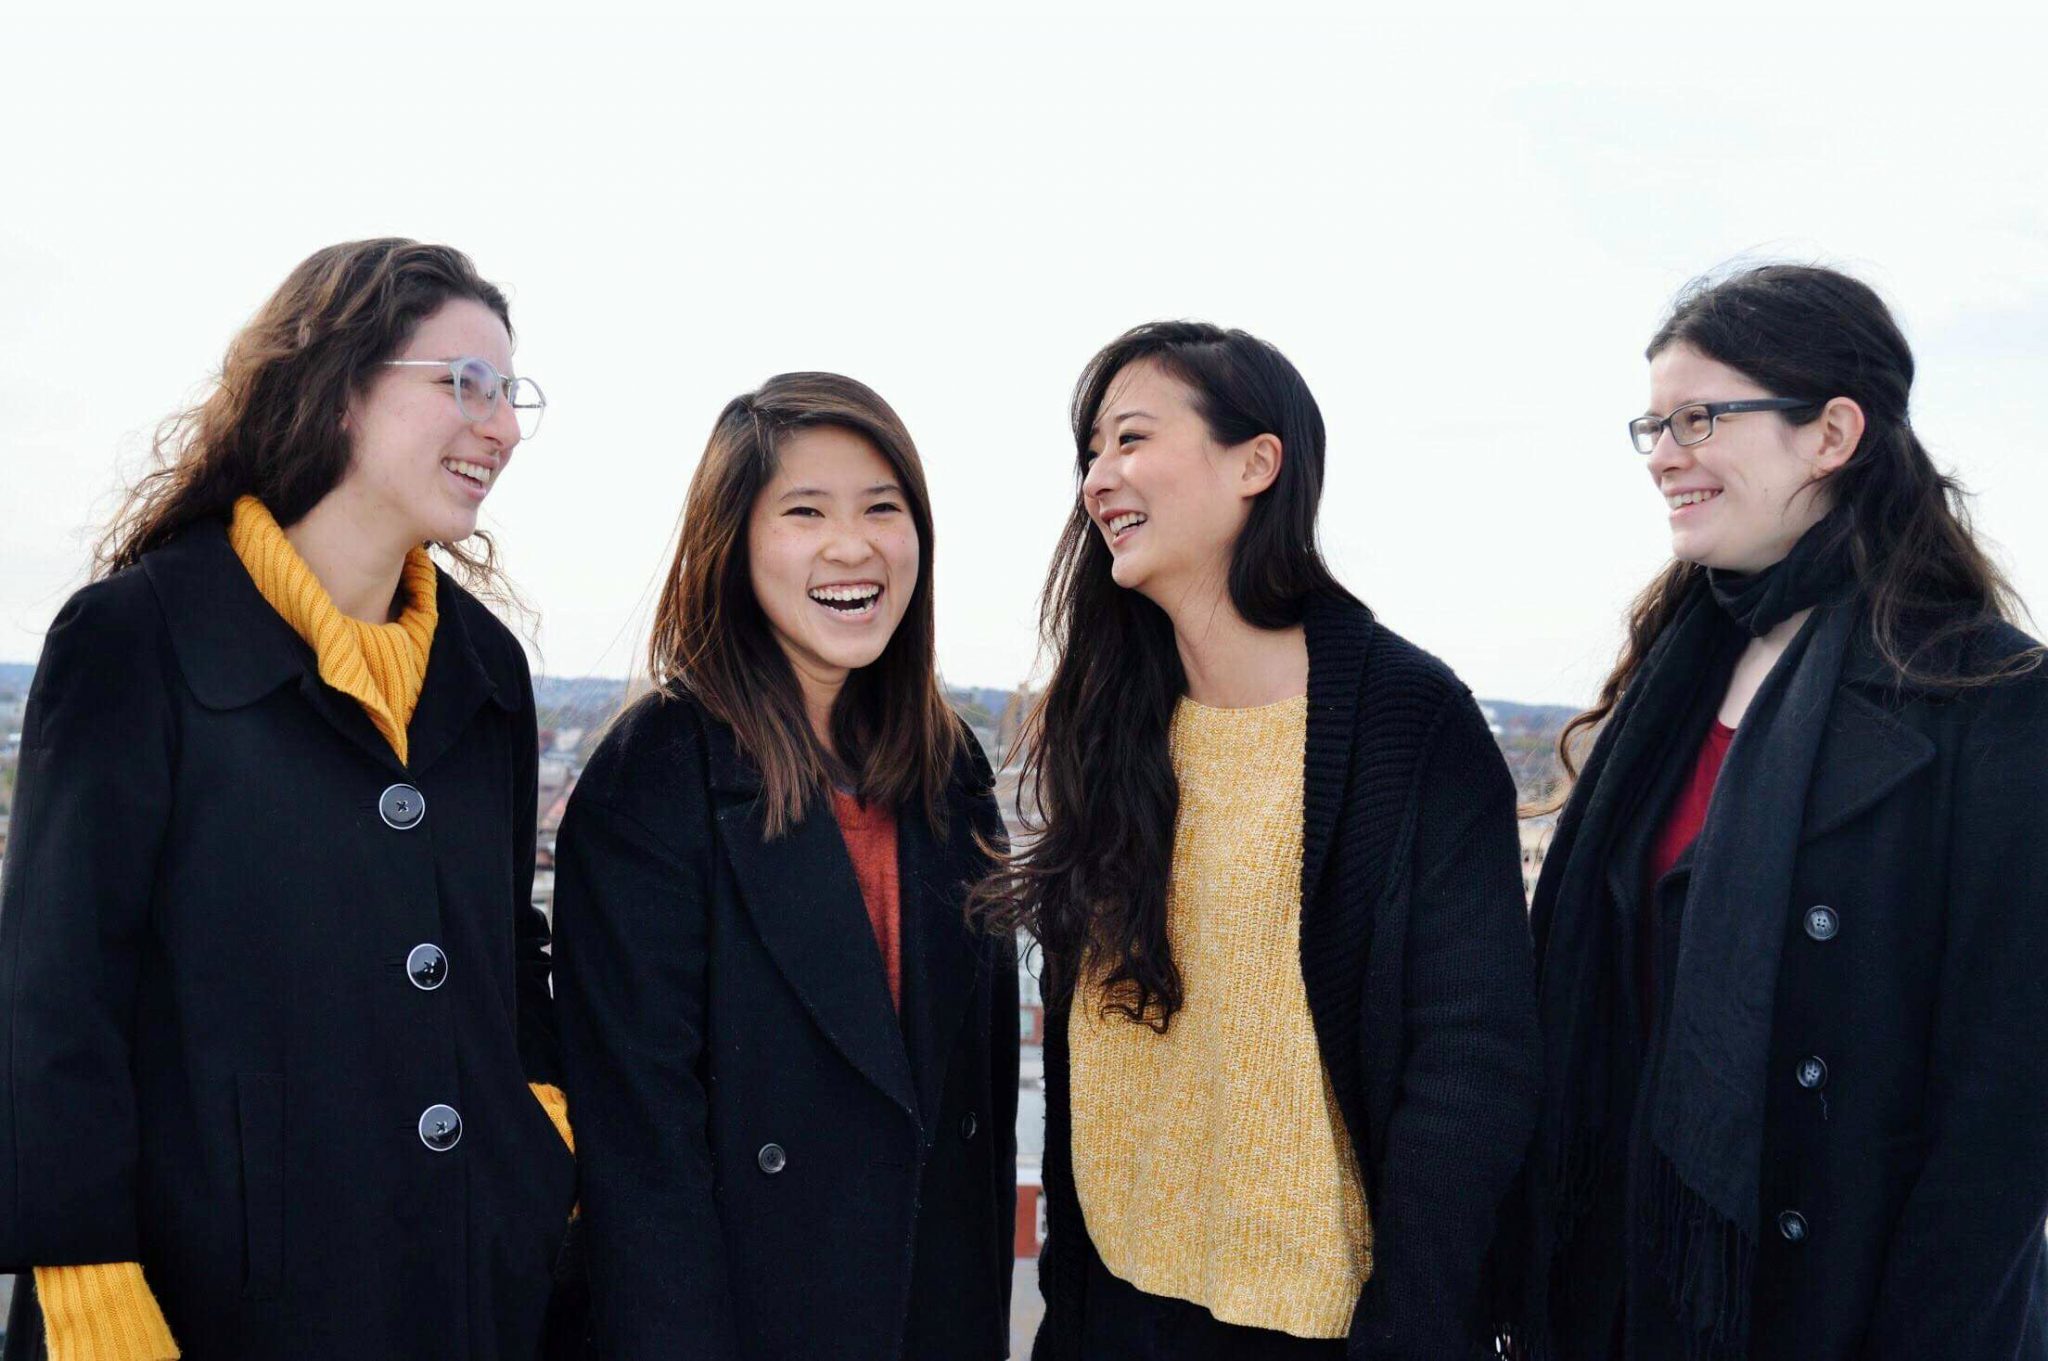 Four women smile and talk against an outdoor background